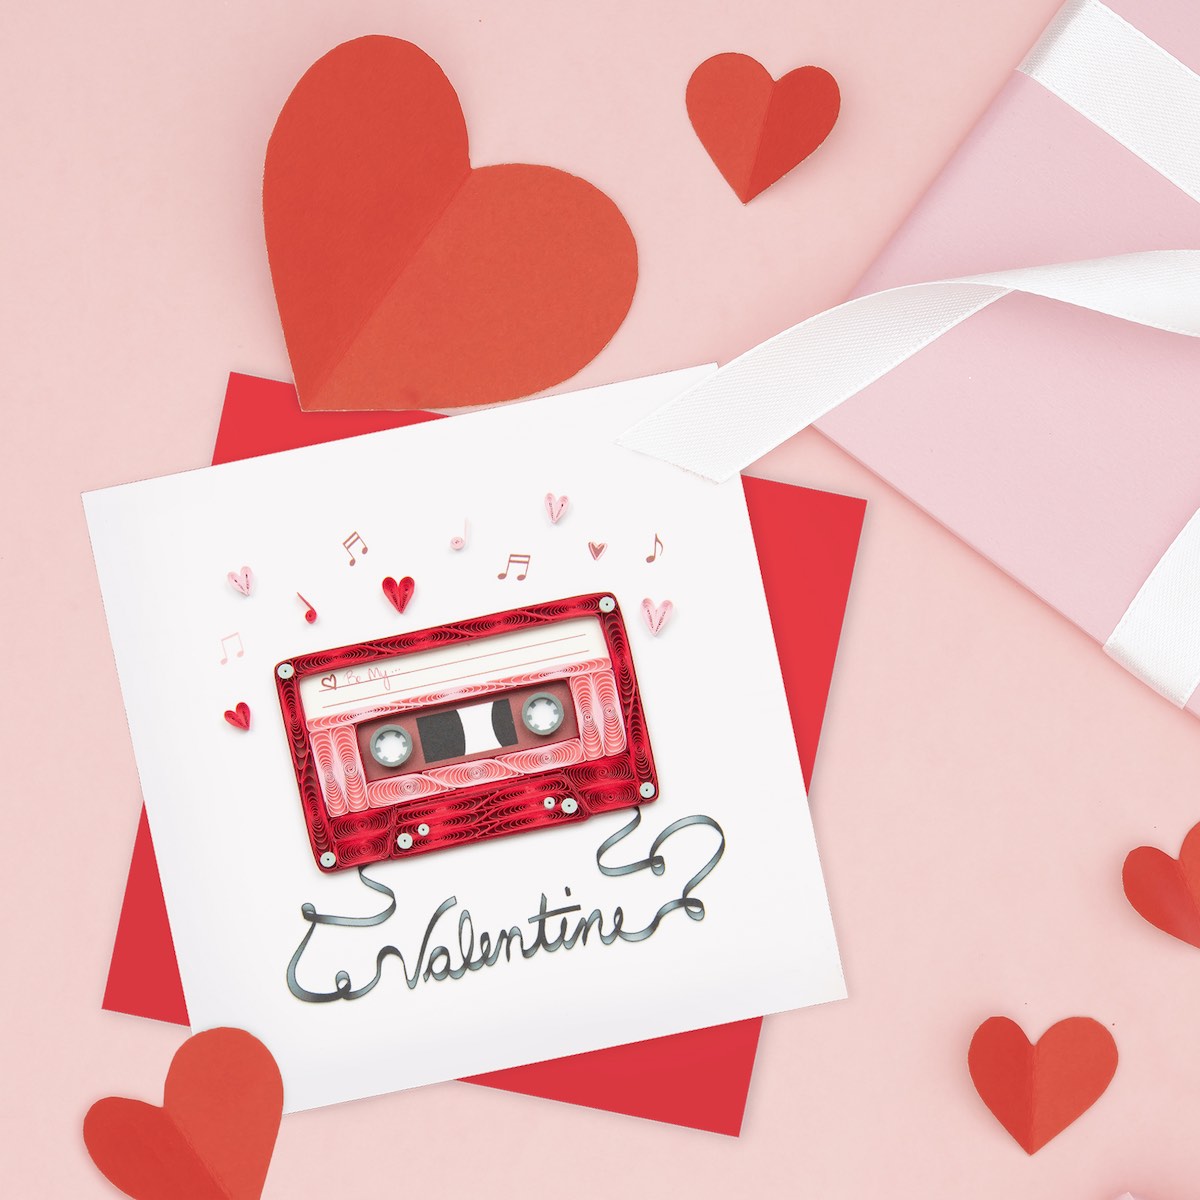 A quilled valentines card showing a cassette tape.